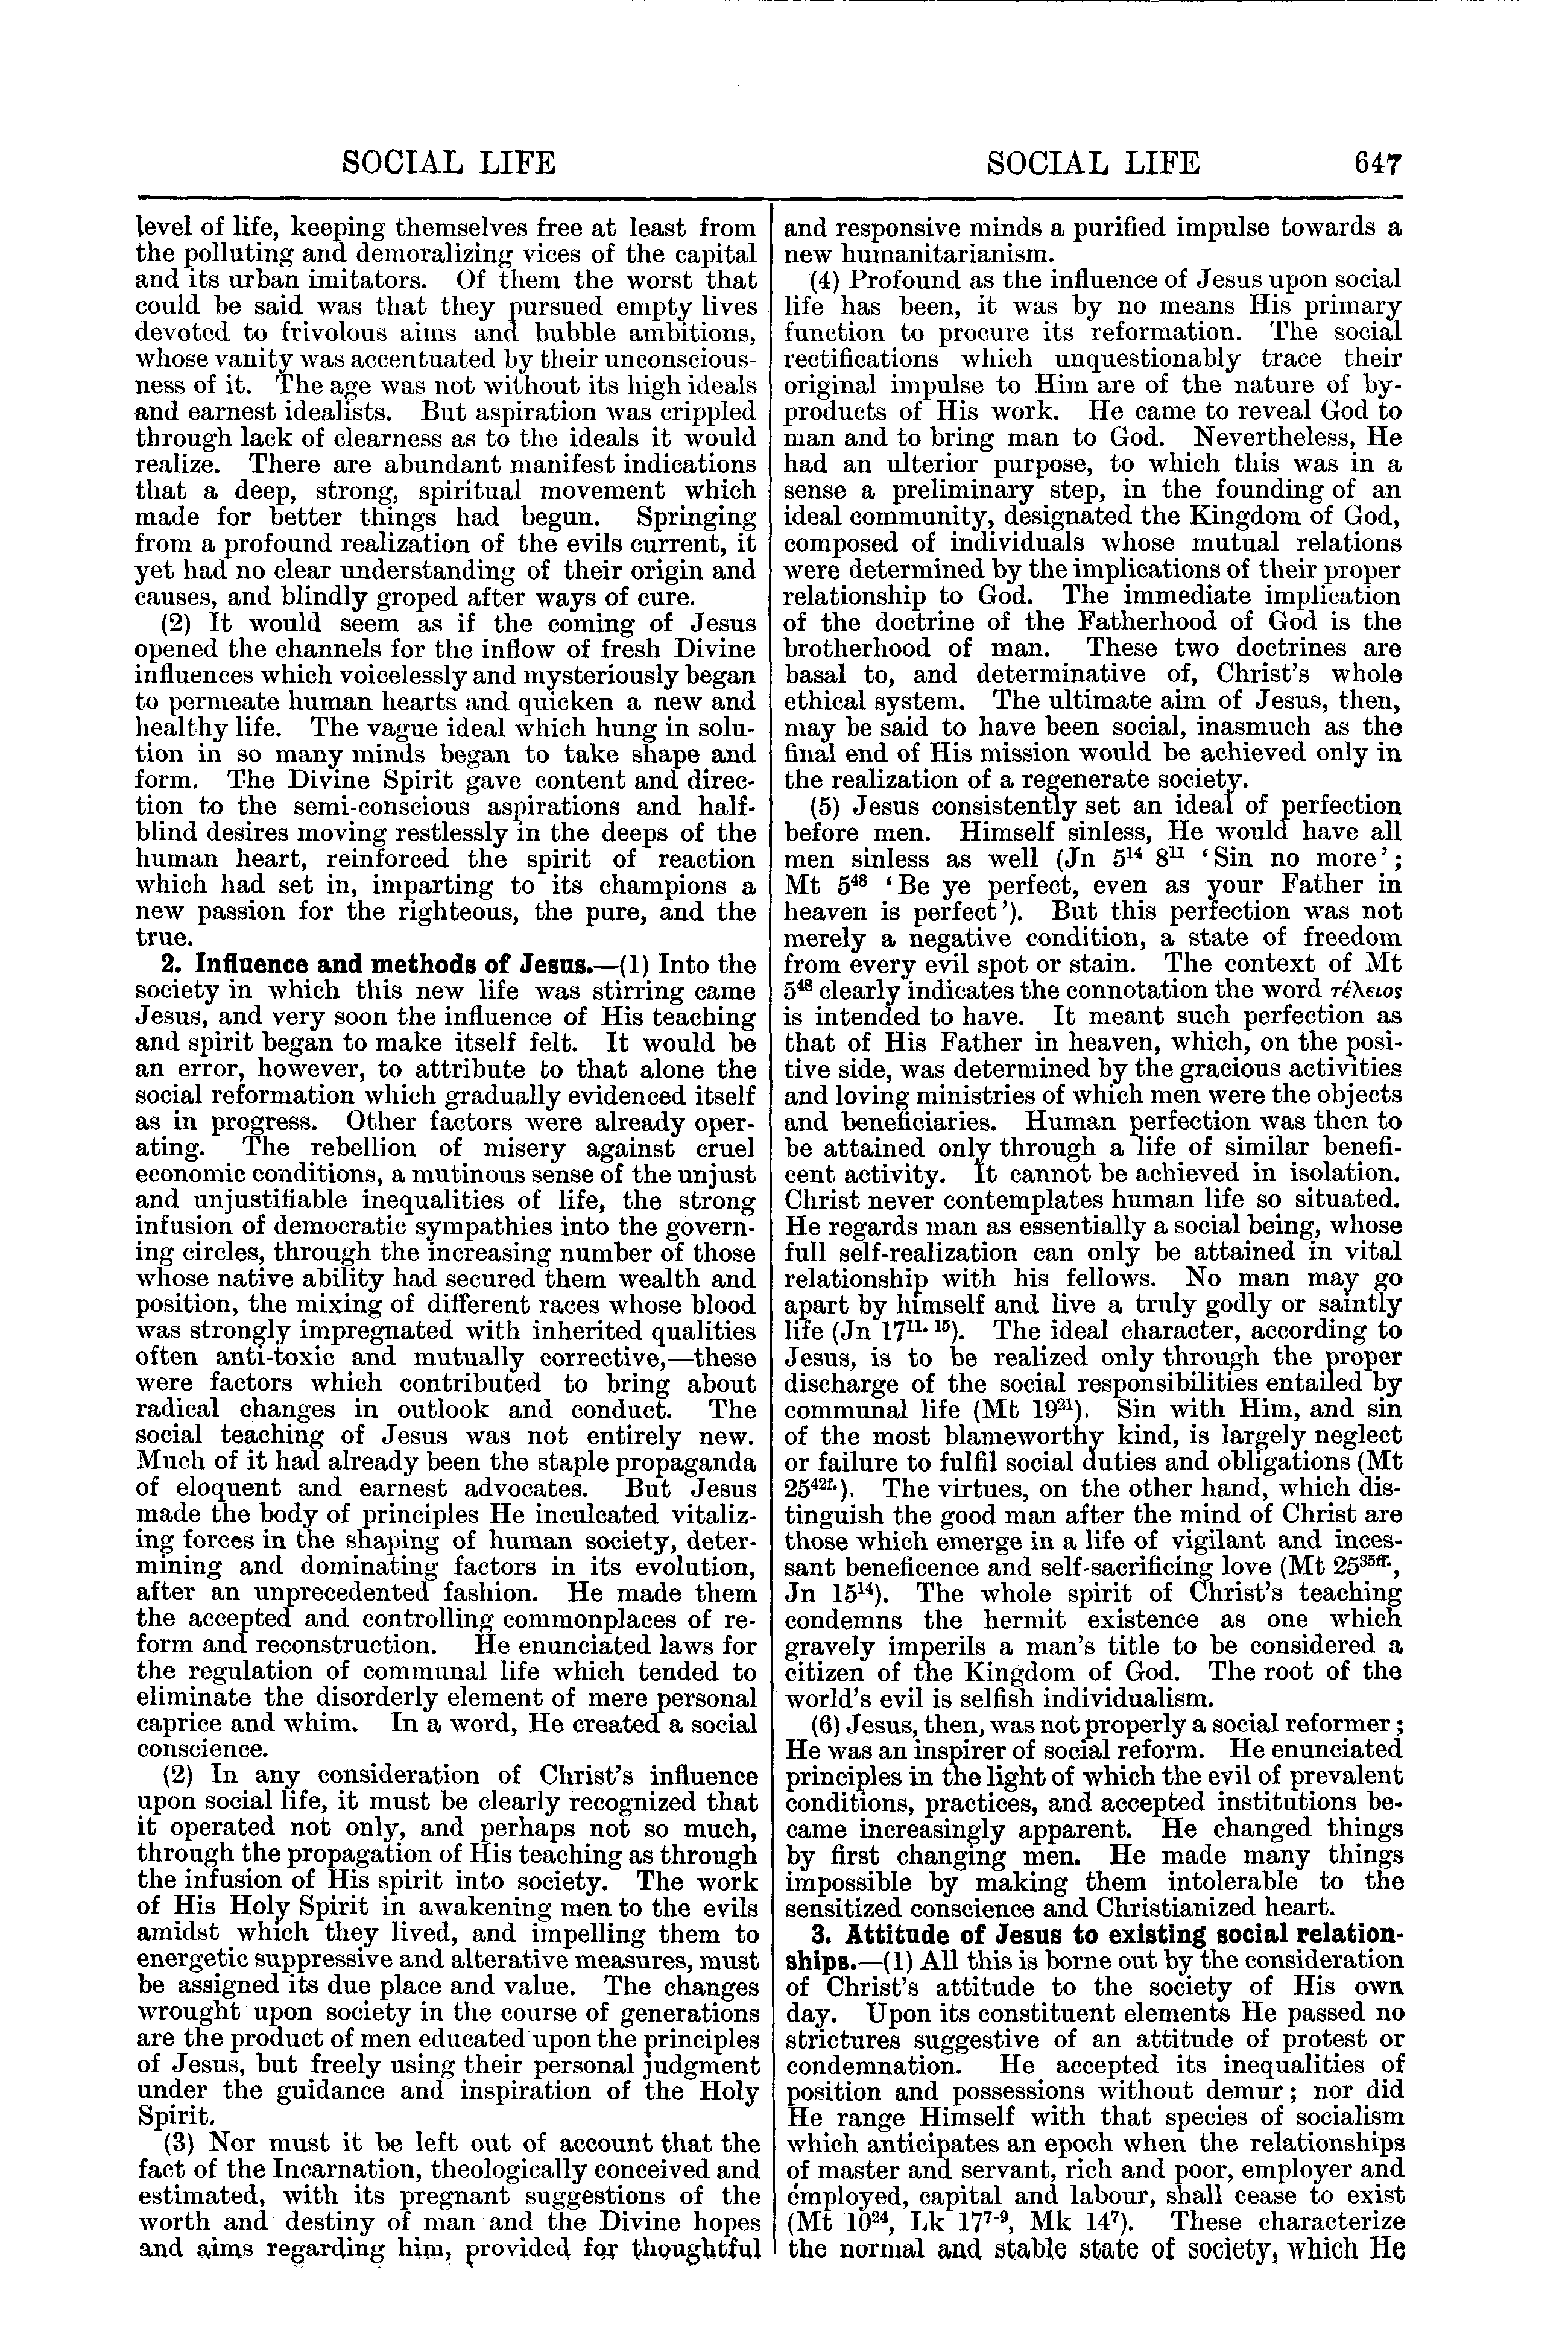 Image of page 647